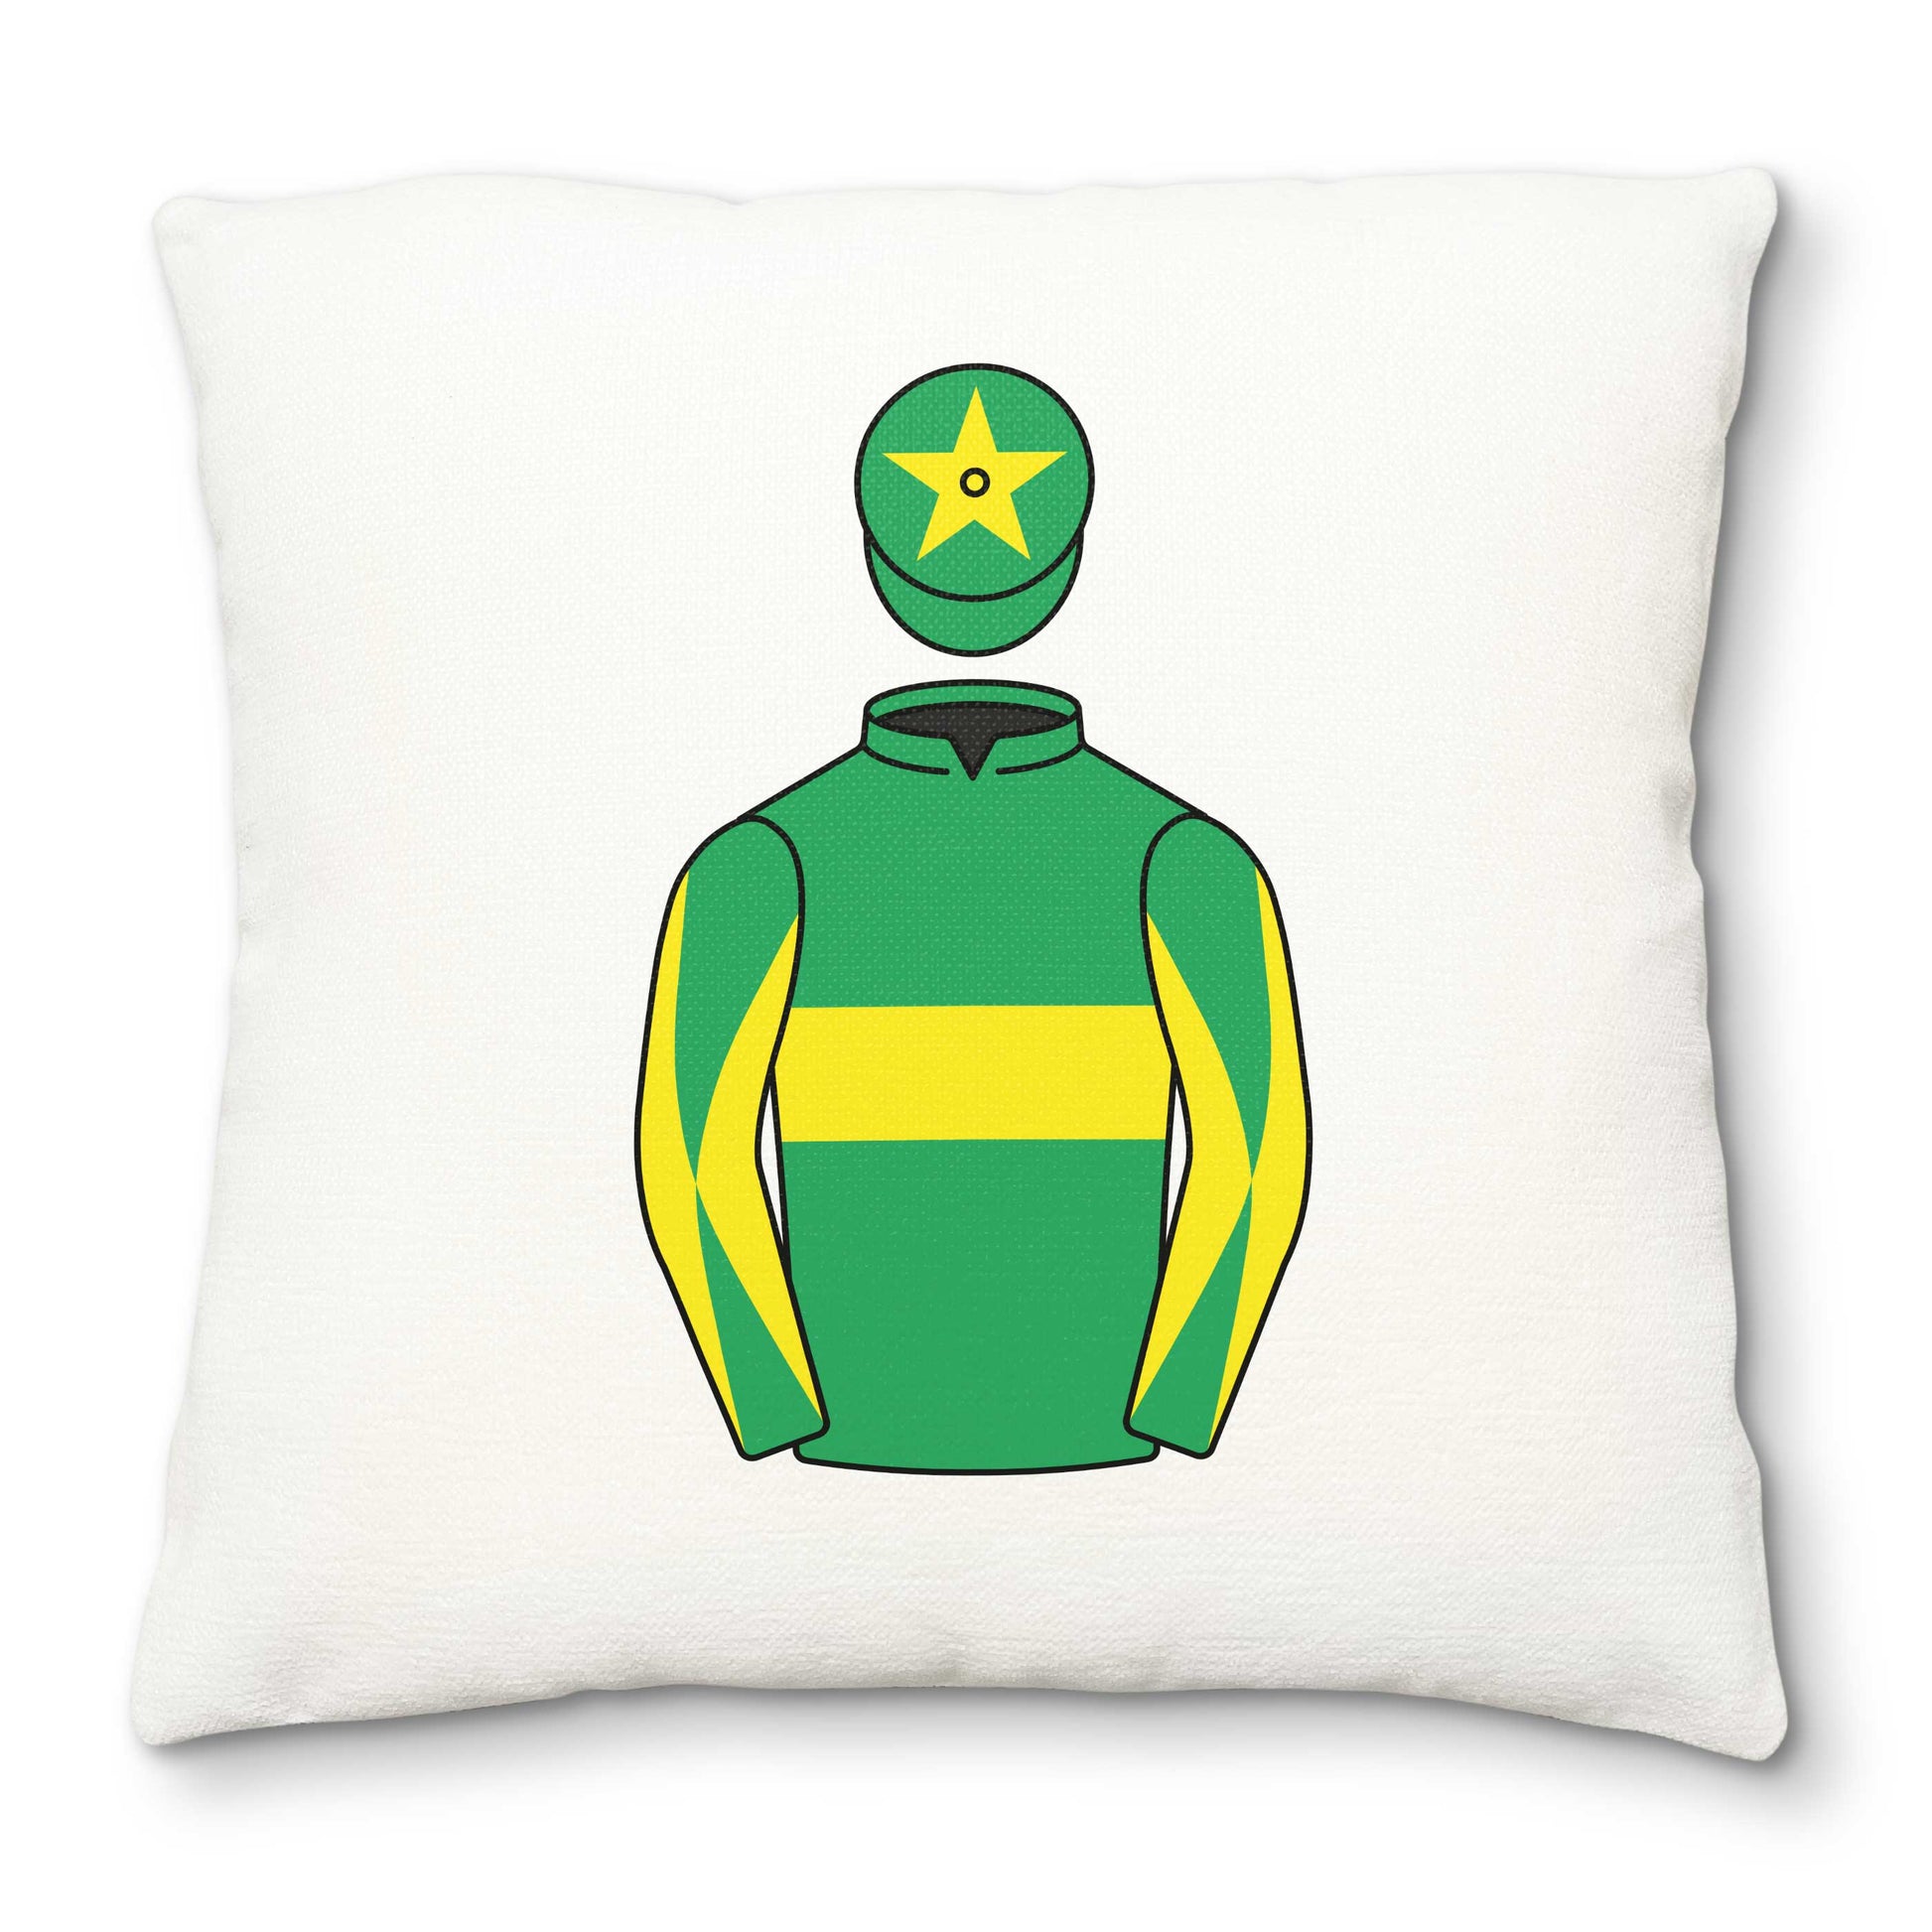 Wessex Racing Club Deluxe Cushion Cover - Hacked Up